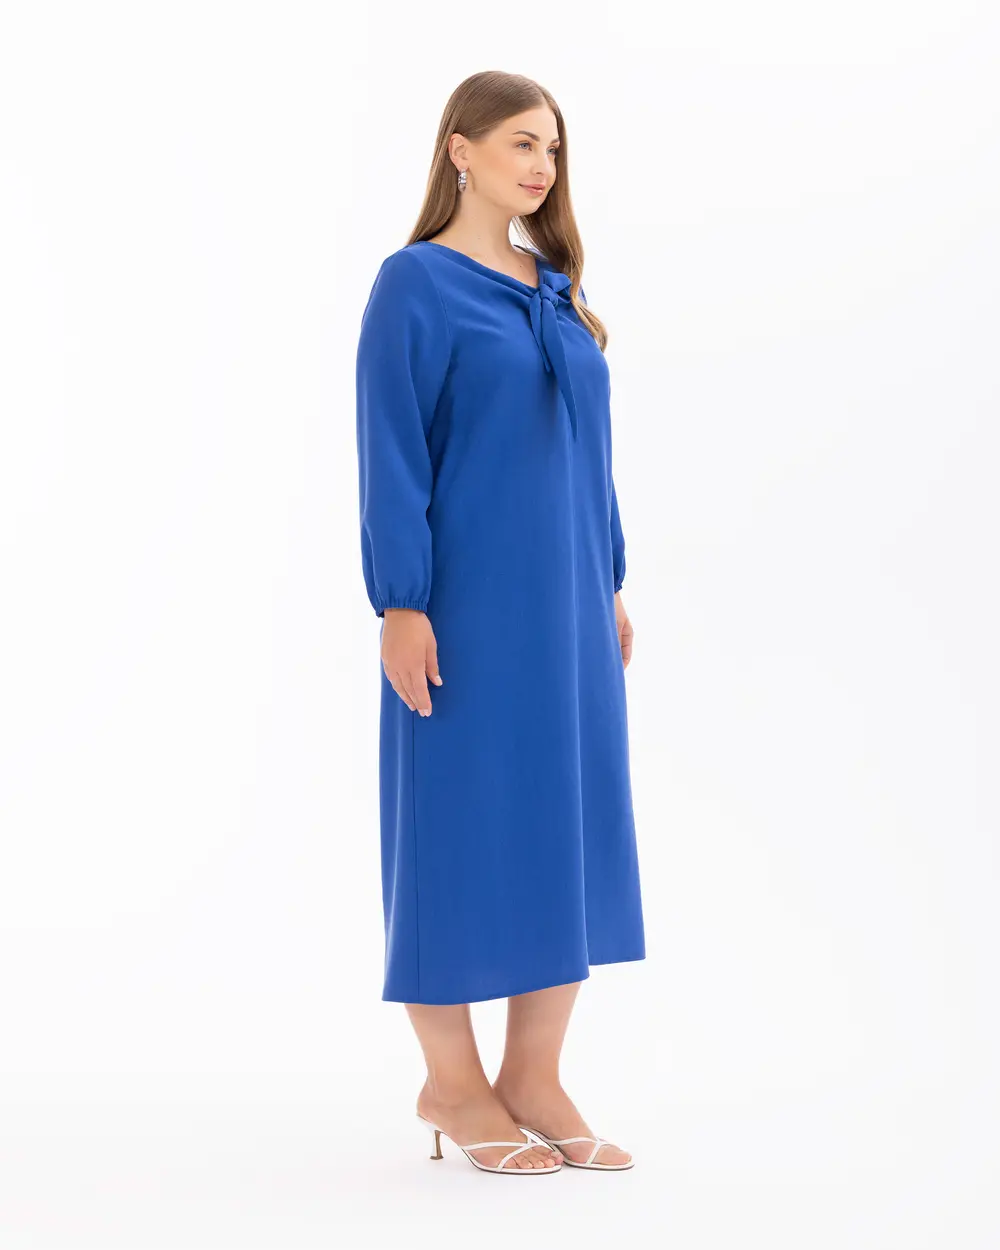 Plus Size Collared Dress